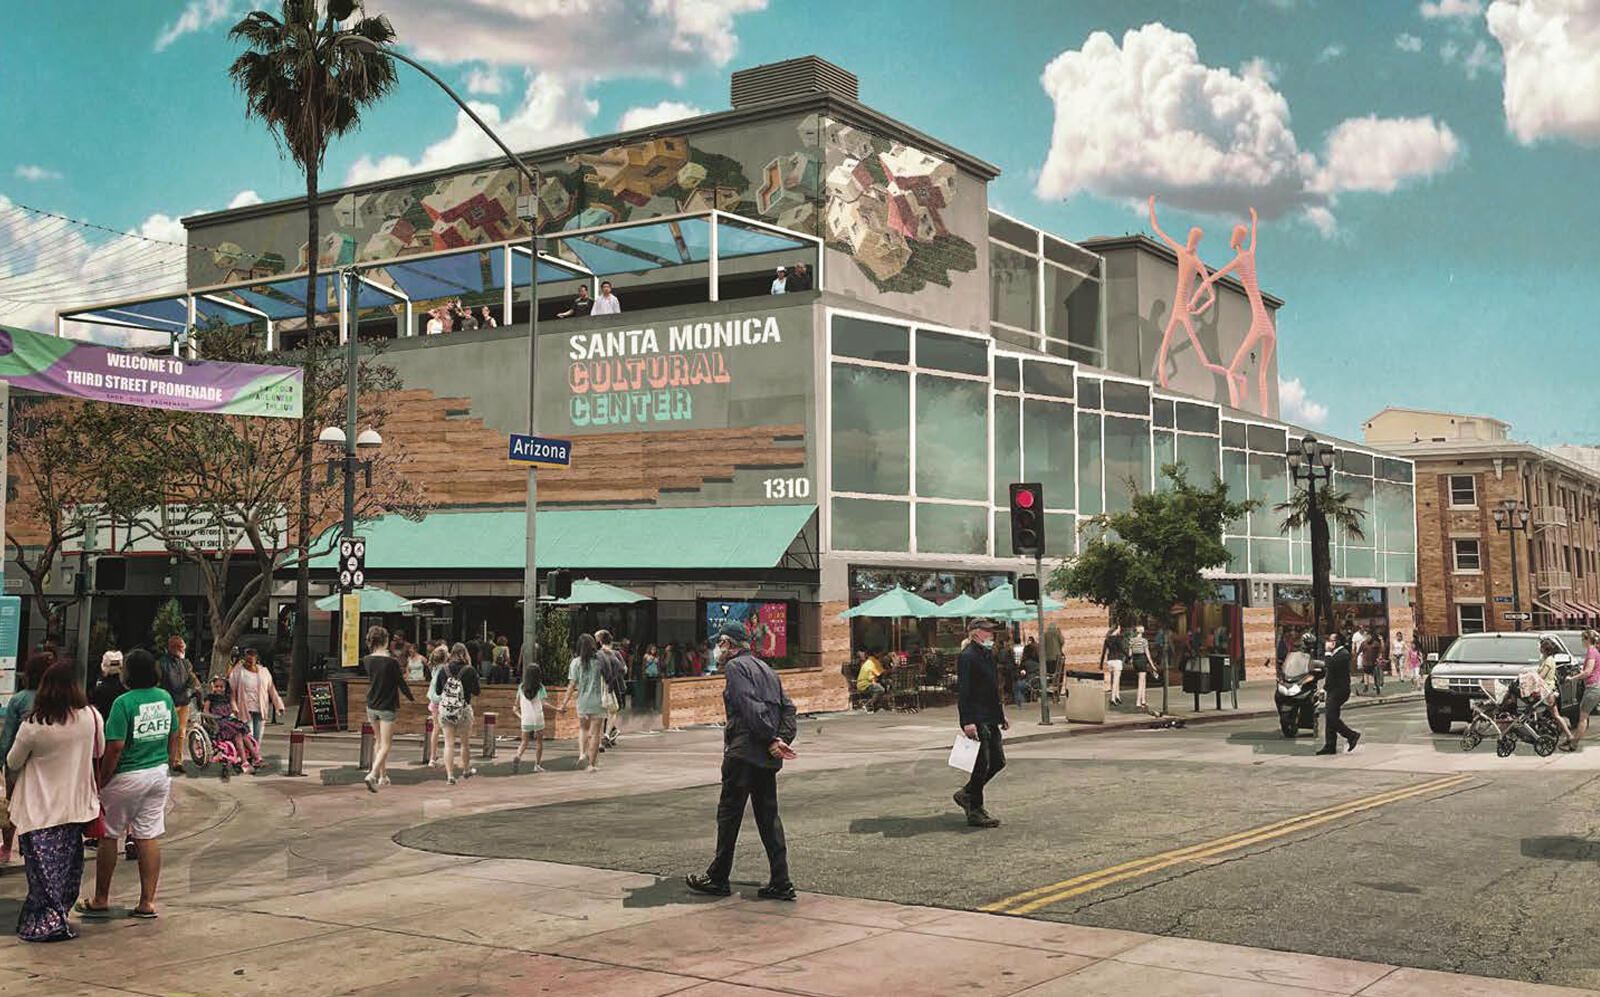 Renderings of Third and Arizona Town Square after the proposed Third Street Promenade Stabilization and Economic Vitality Plan (Downtown Santa Monica)